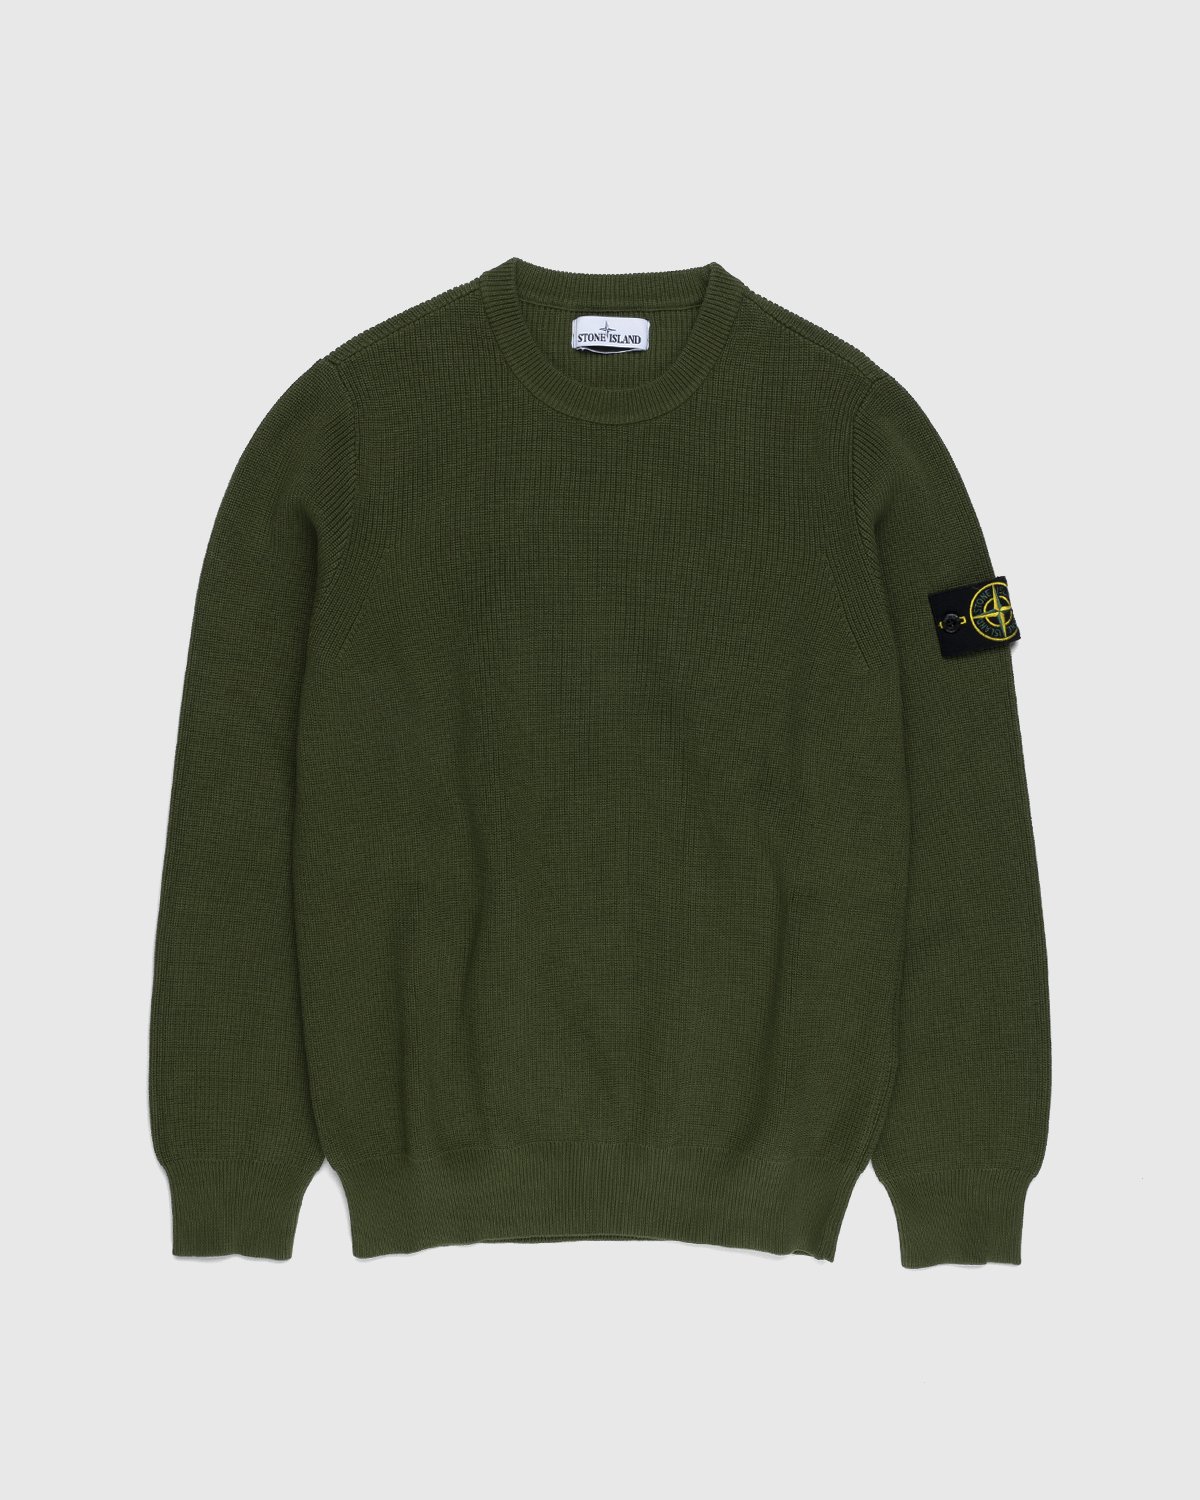 Stone Island - 550D8 Ribbed Soft Cotton Knit Olive - Clothing - Green - Image 1